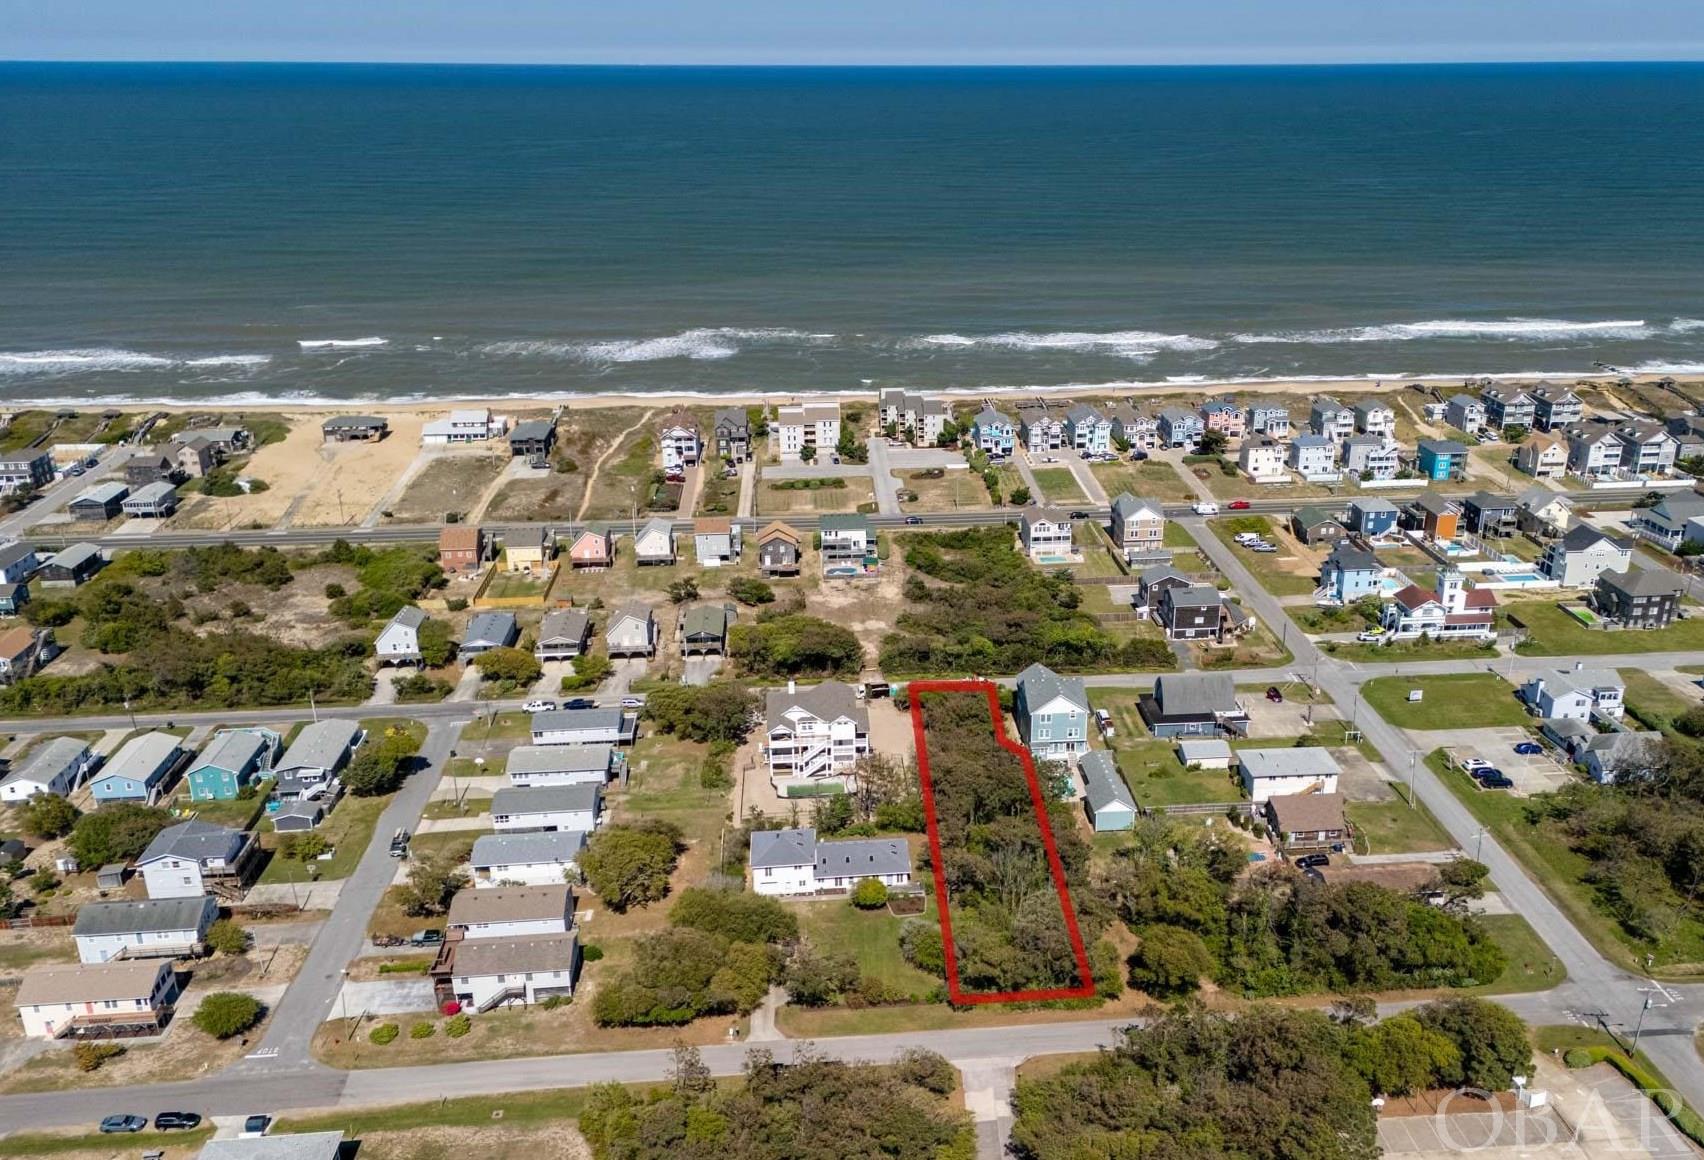 Large lot in the heart of Nags Head. This unique lot with apx 17,000 sqft offers many potential possibilities with access from Wrightsville Ave on the west side and Memorial Ave on the East side. One of the few through lots available in Nags Head, 51' road frontage on Memorial - 60' road frontage on Wrightsville. C4 zoning appears to allow many building options.  Build your dream home, second home or investment property with an ocean view. This ideal location is close to shopping, galleries, and restaurant such as Red Drum Grill and Taphouse, Mahi Mahi, Booty Treats ice cream. Located between Gallery Row and Albatross beach access.